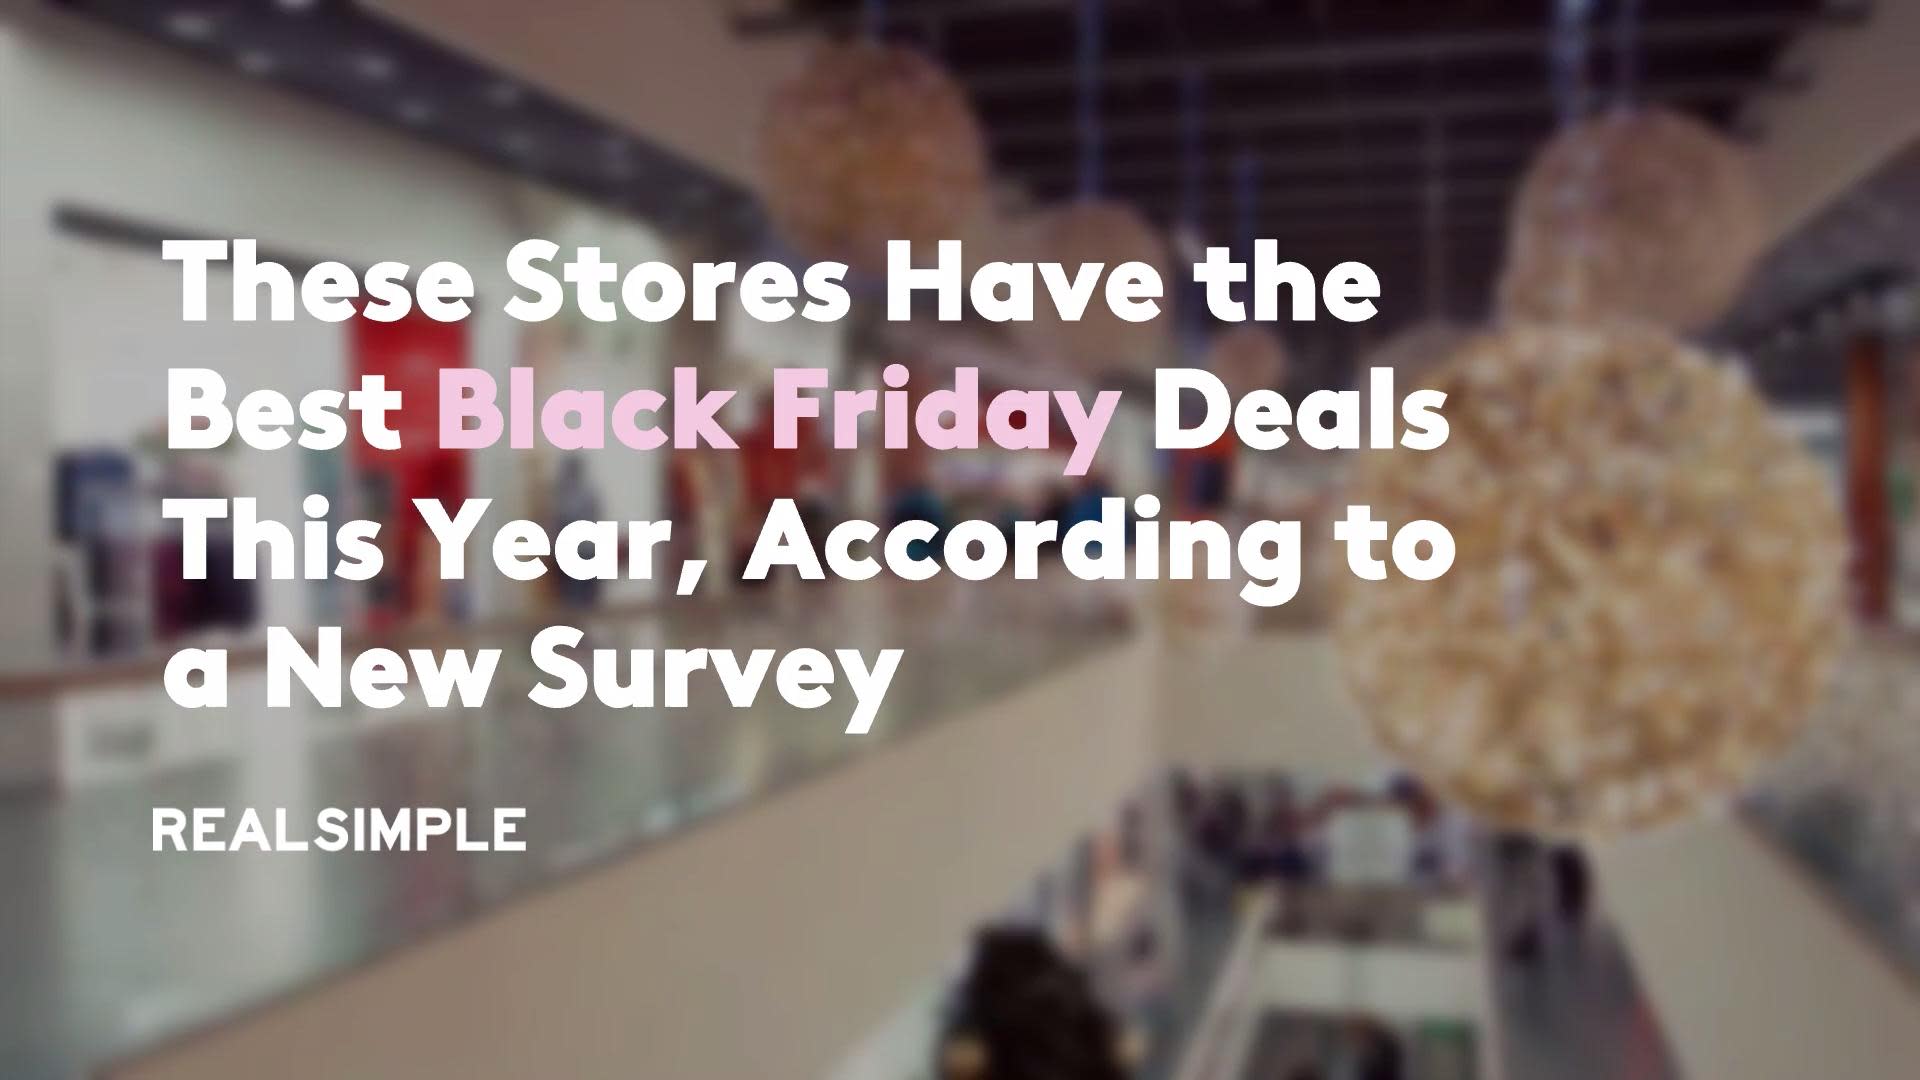 These Stores Have the Best Black Friday Deals This Year, According to a